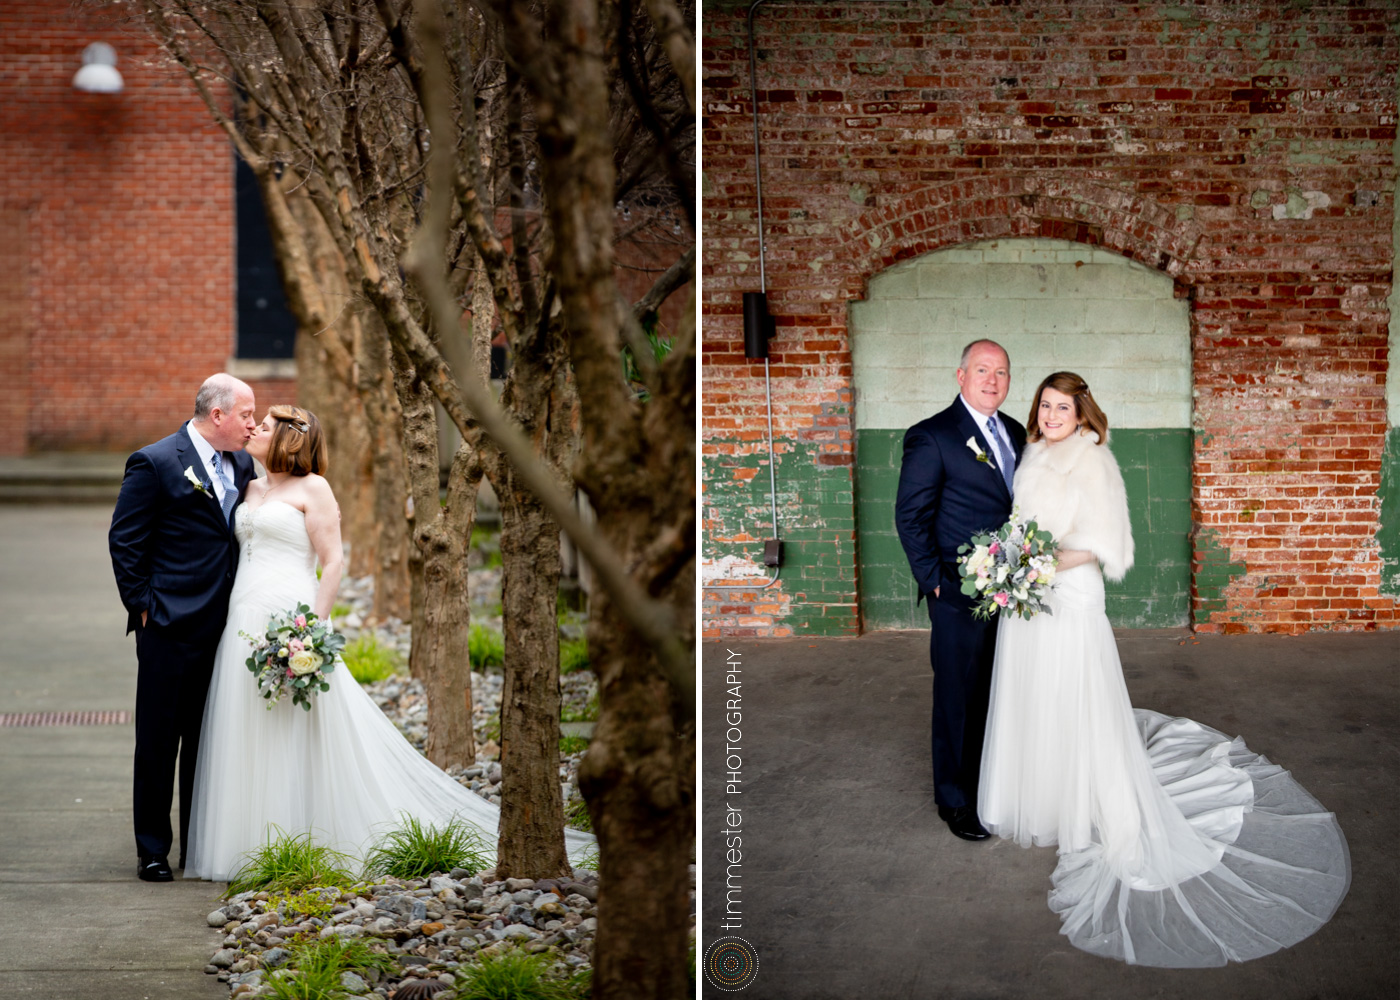 A wedding at The Beltline Station and The Cotton Room in Durham.